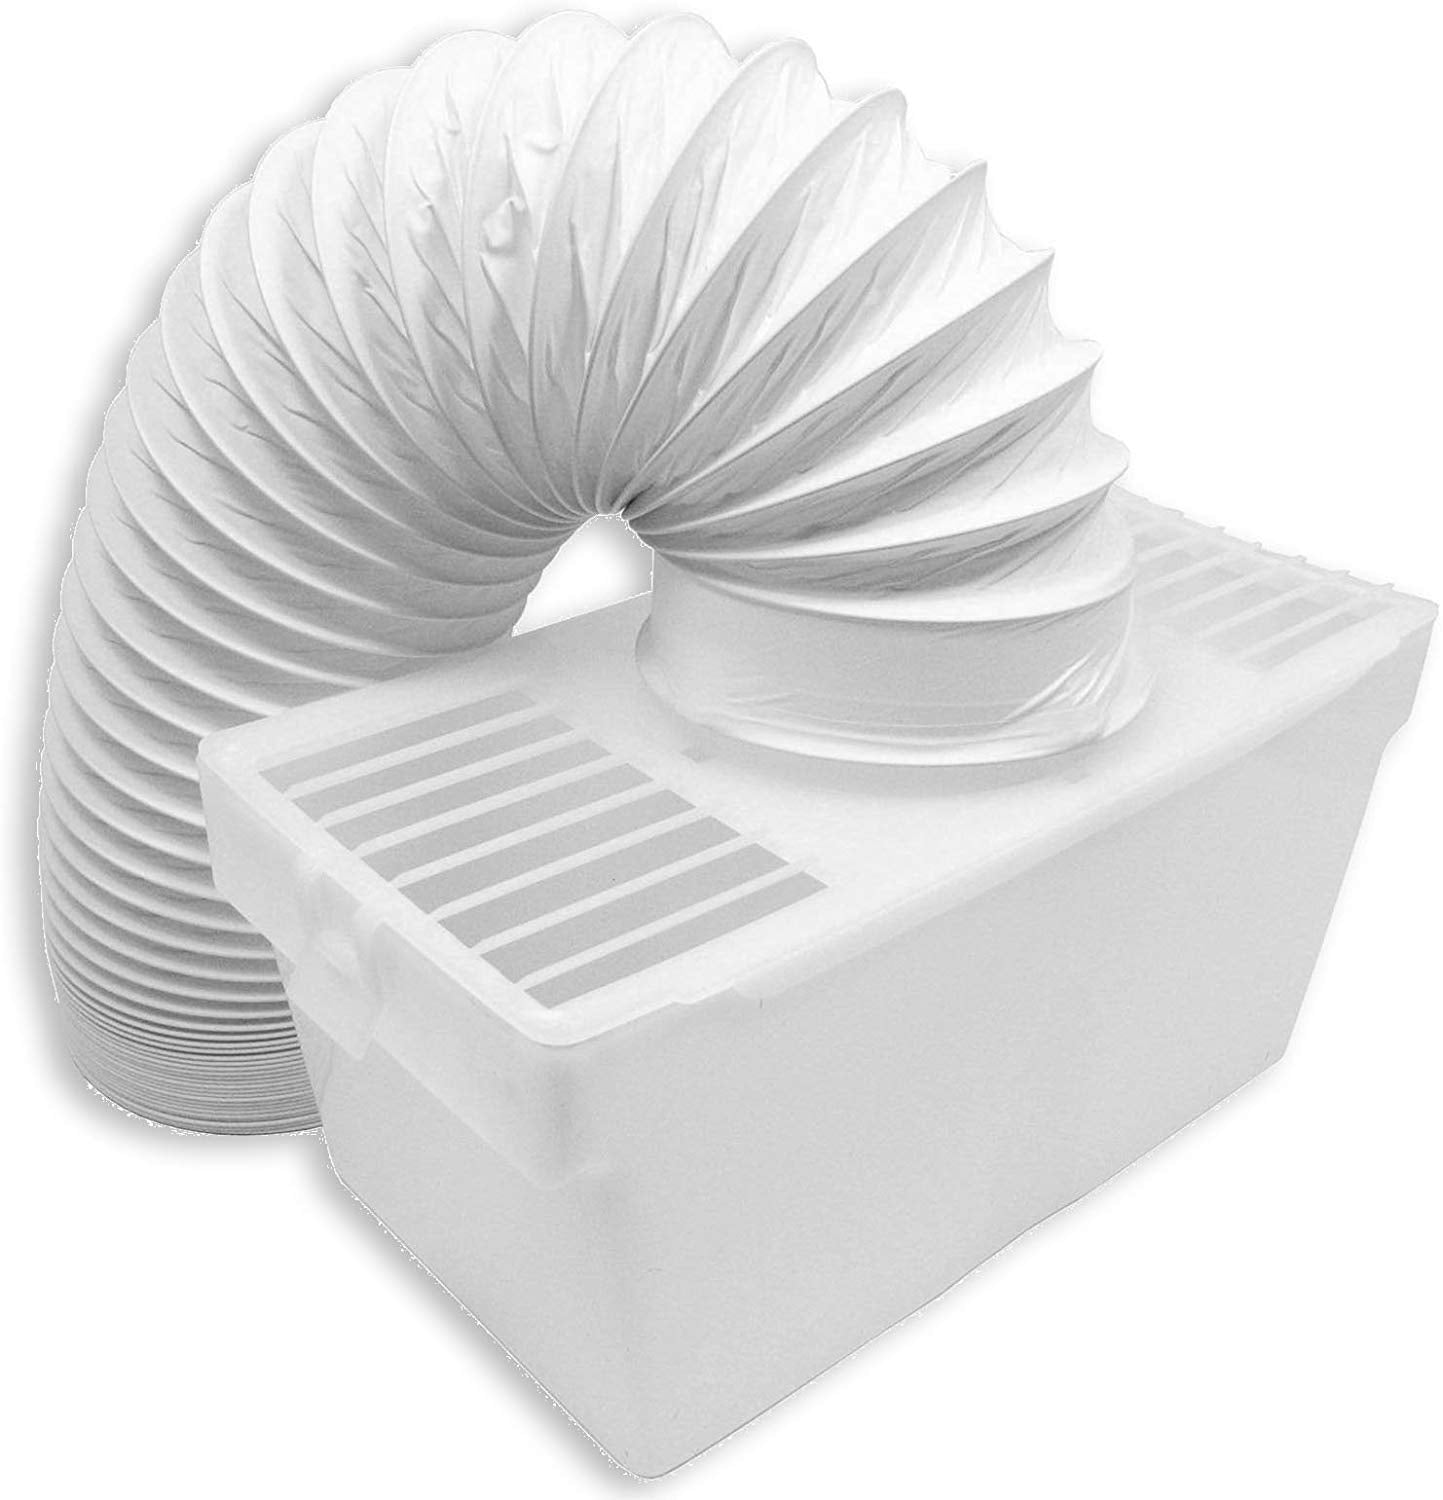 Condenser Box & Extra Long Hose Kit With Connection Ring for Miele Tumble Dryer (4" / 100mm Diameter / 6M Hose)